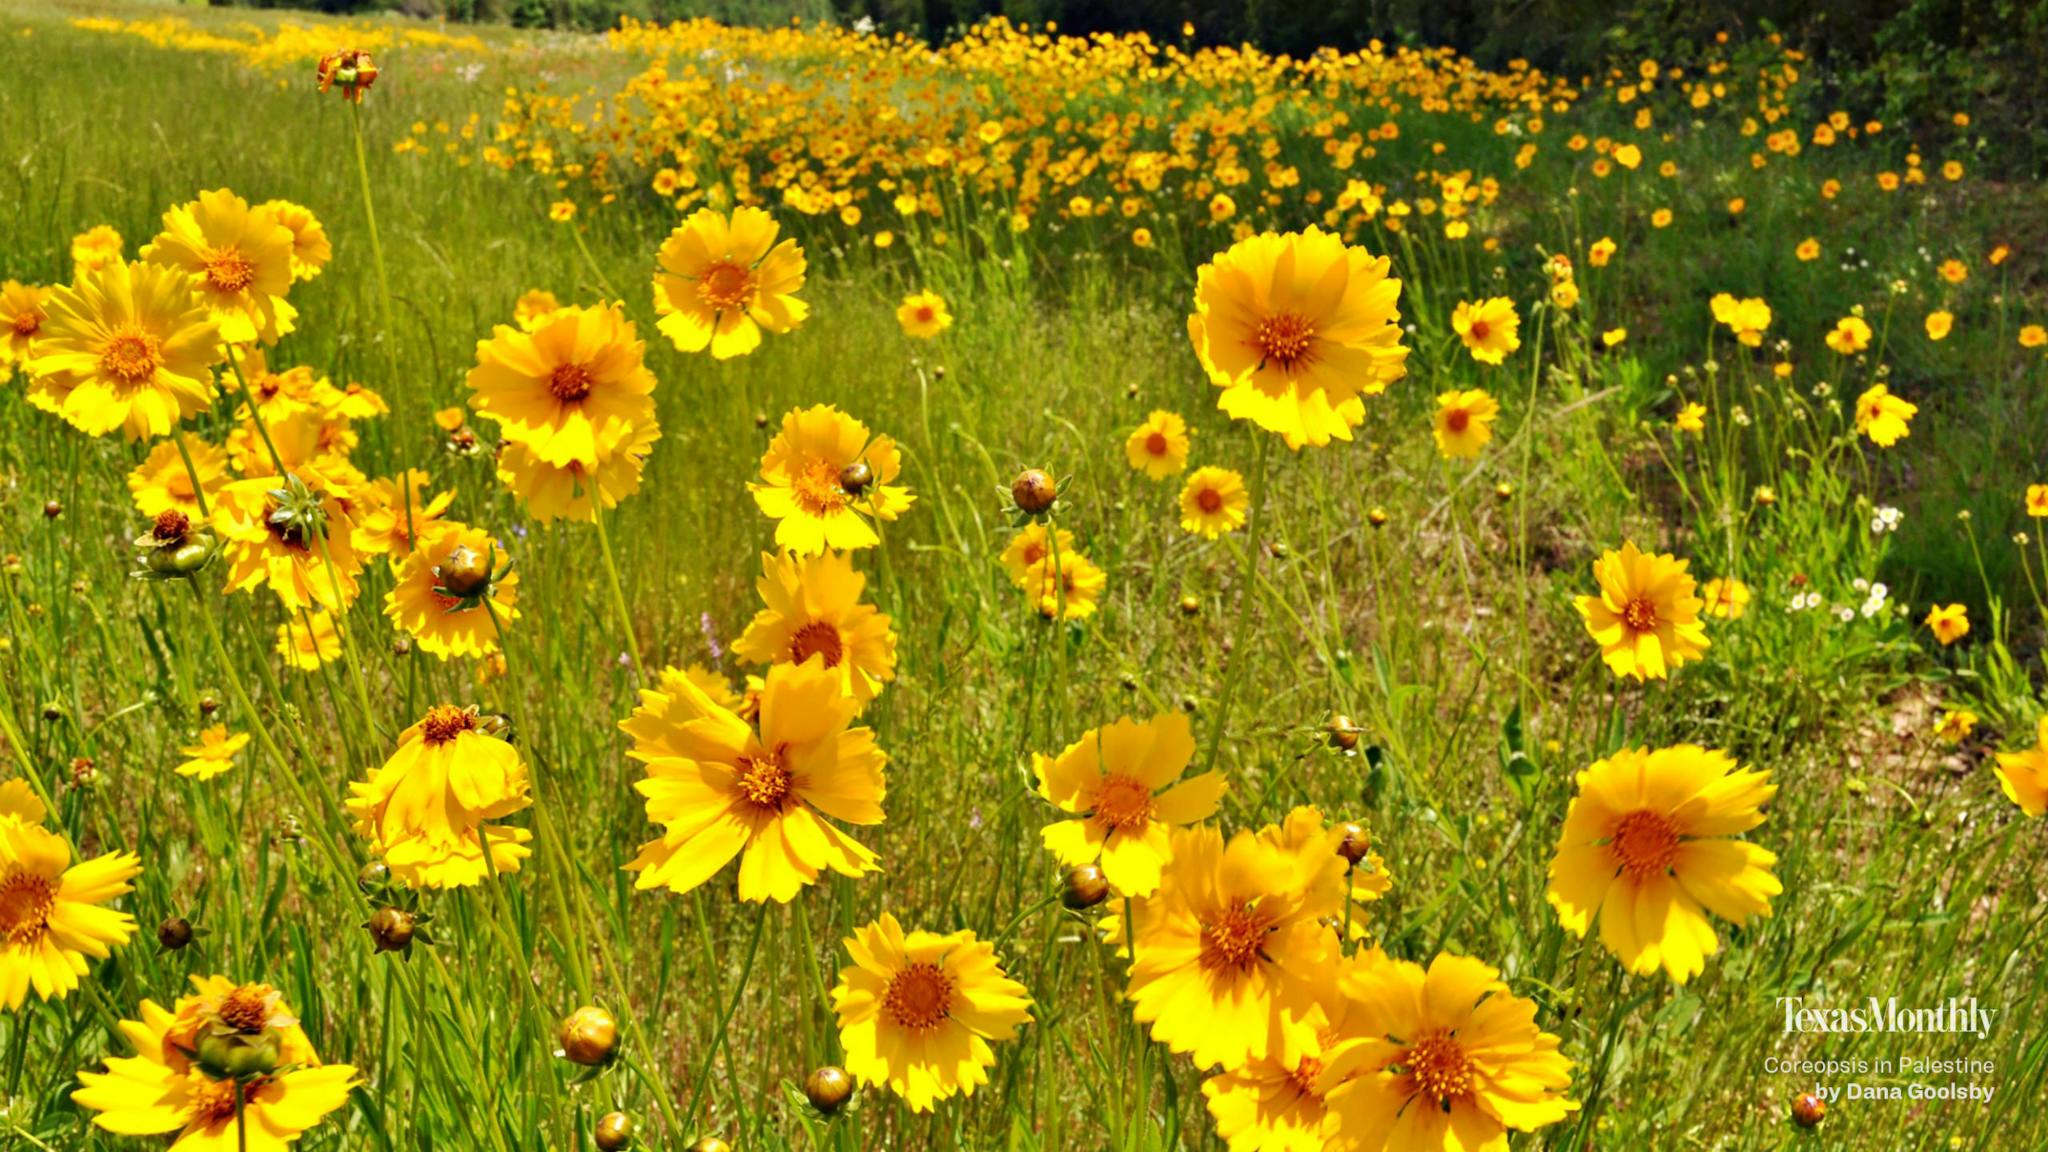 Coreopsis flowers in Palestine zoom background.